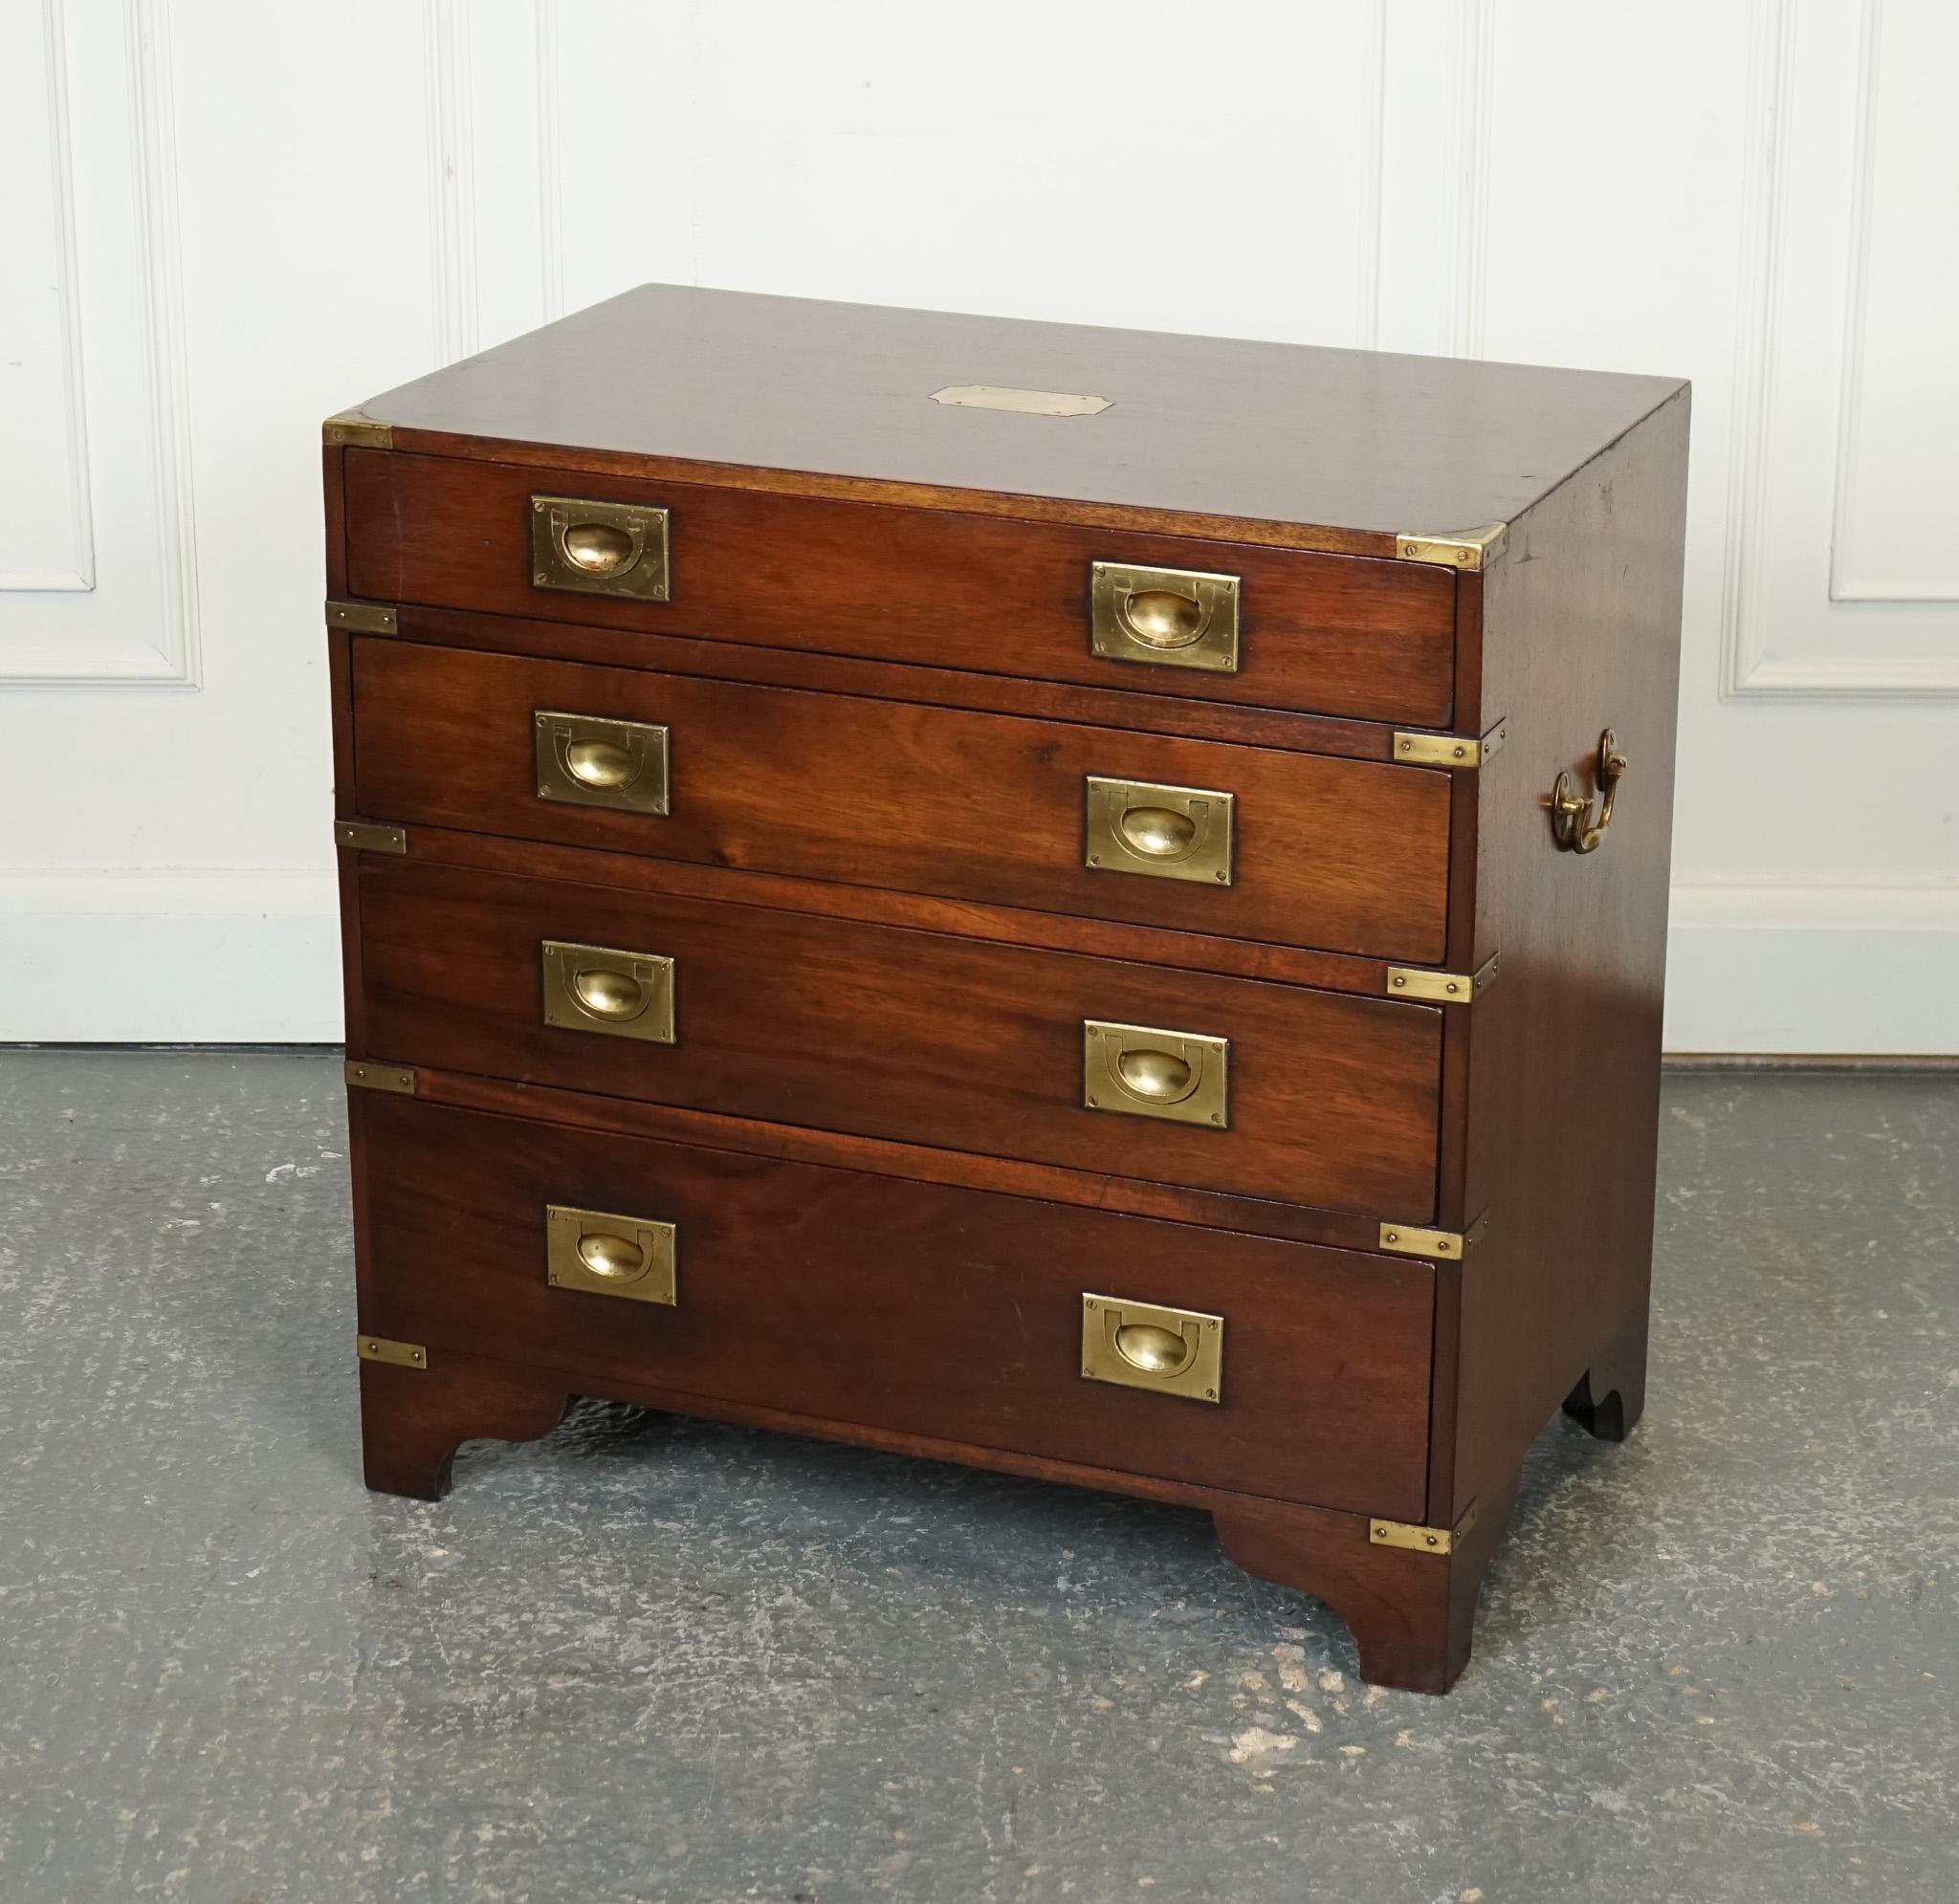 Antiques of London



We are delighted to offer for sale this Stunning Harrods Kennedy Military Campaign Chest Of Drawers.

The stunning Harrods Kennedy Military Campaign Chest of Drawers with Brass Handles is a luxurious and visually striking piece